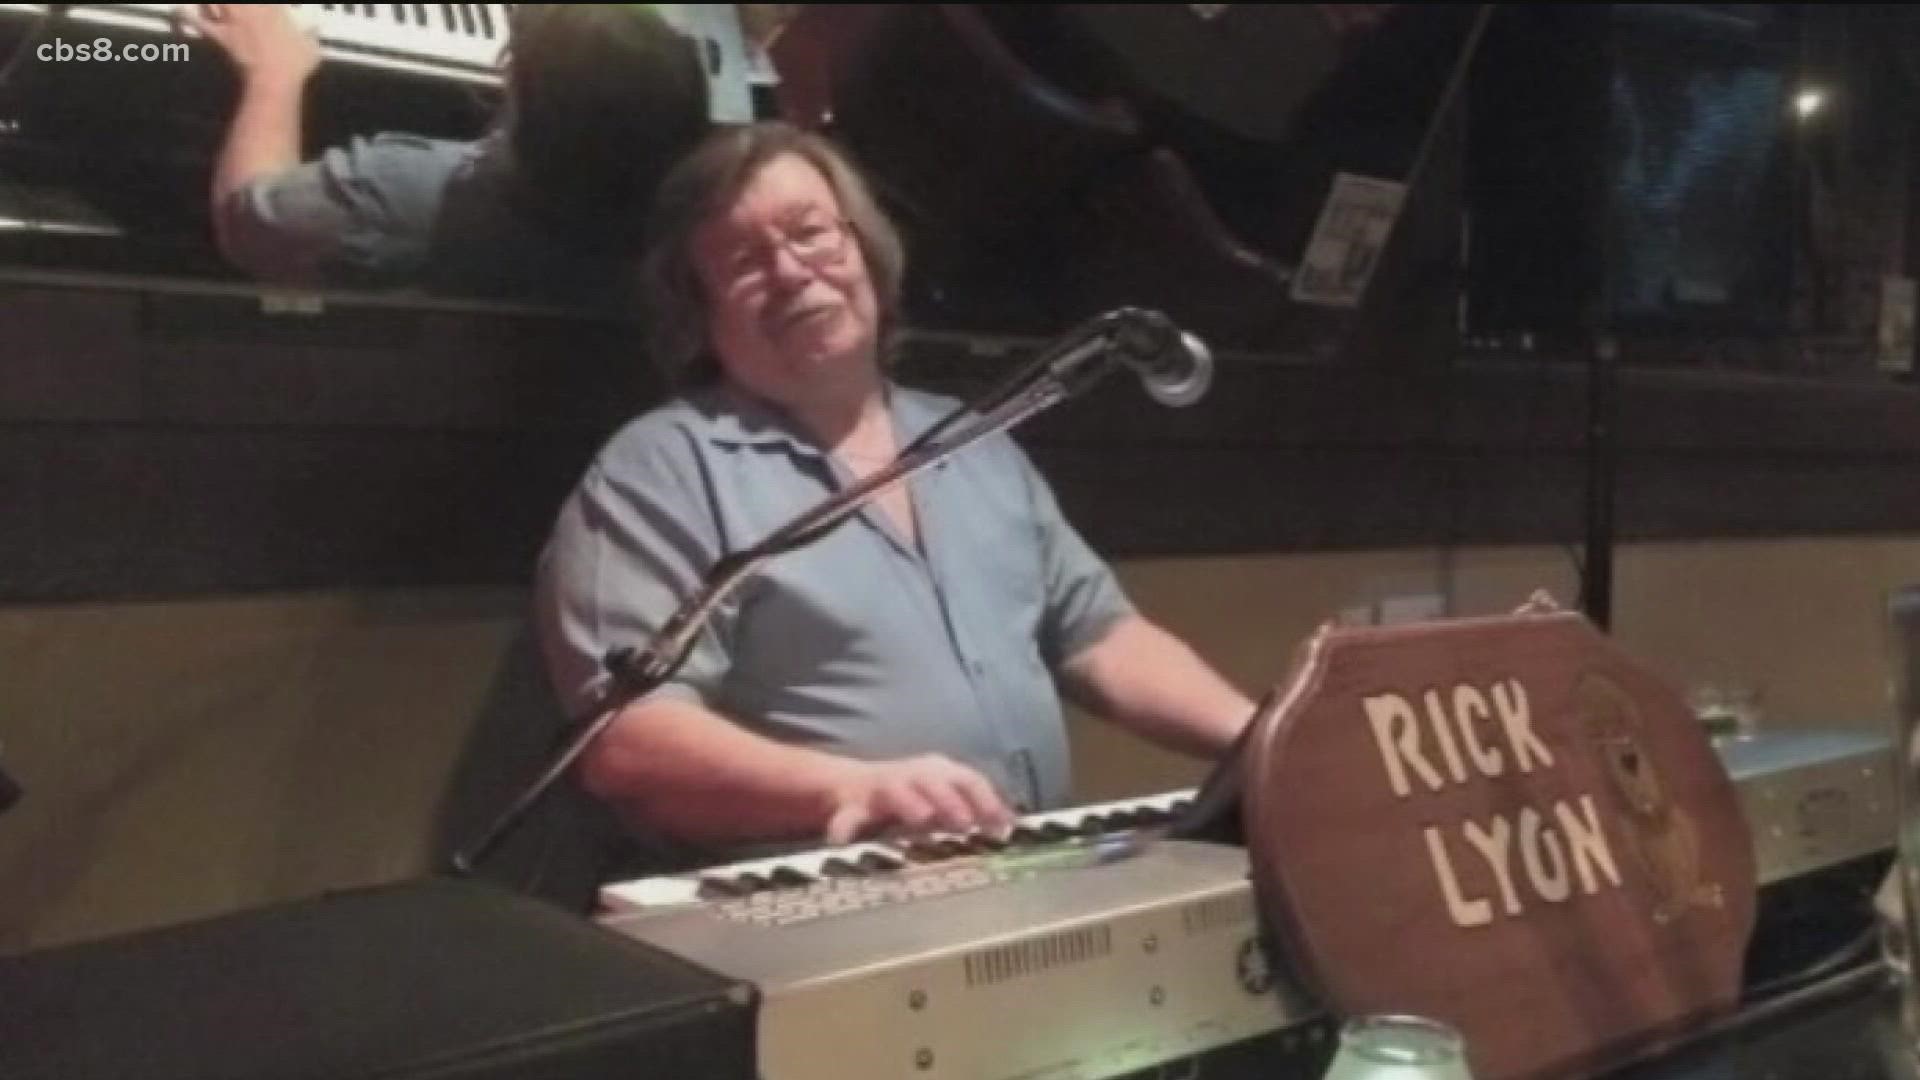 Rick Lyon played music at Imperial House for around 17 years until he got down on his luck.